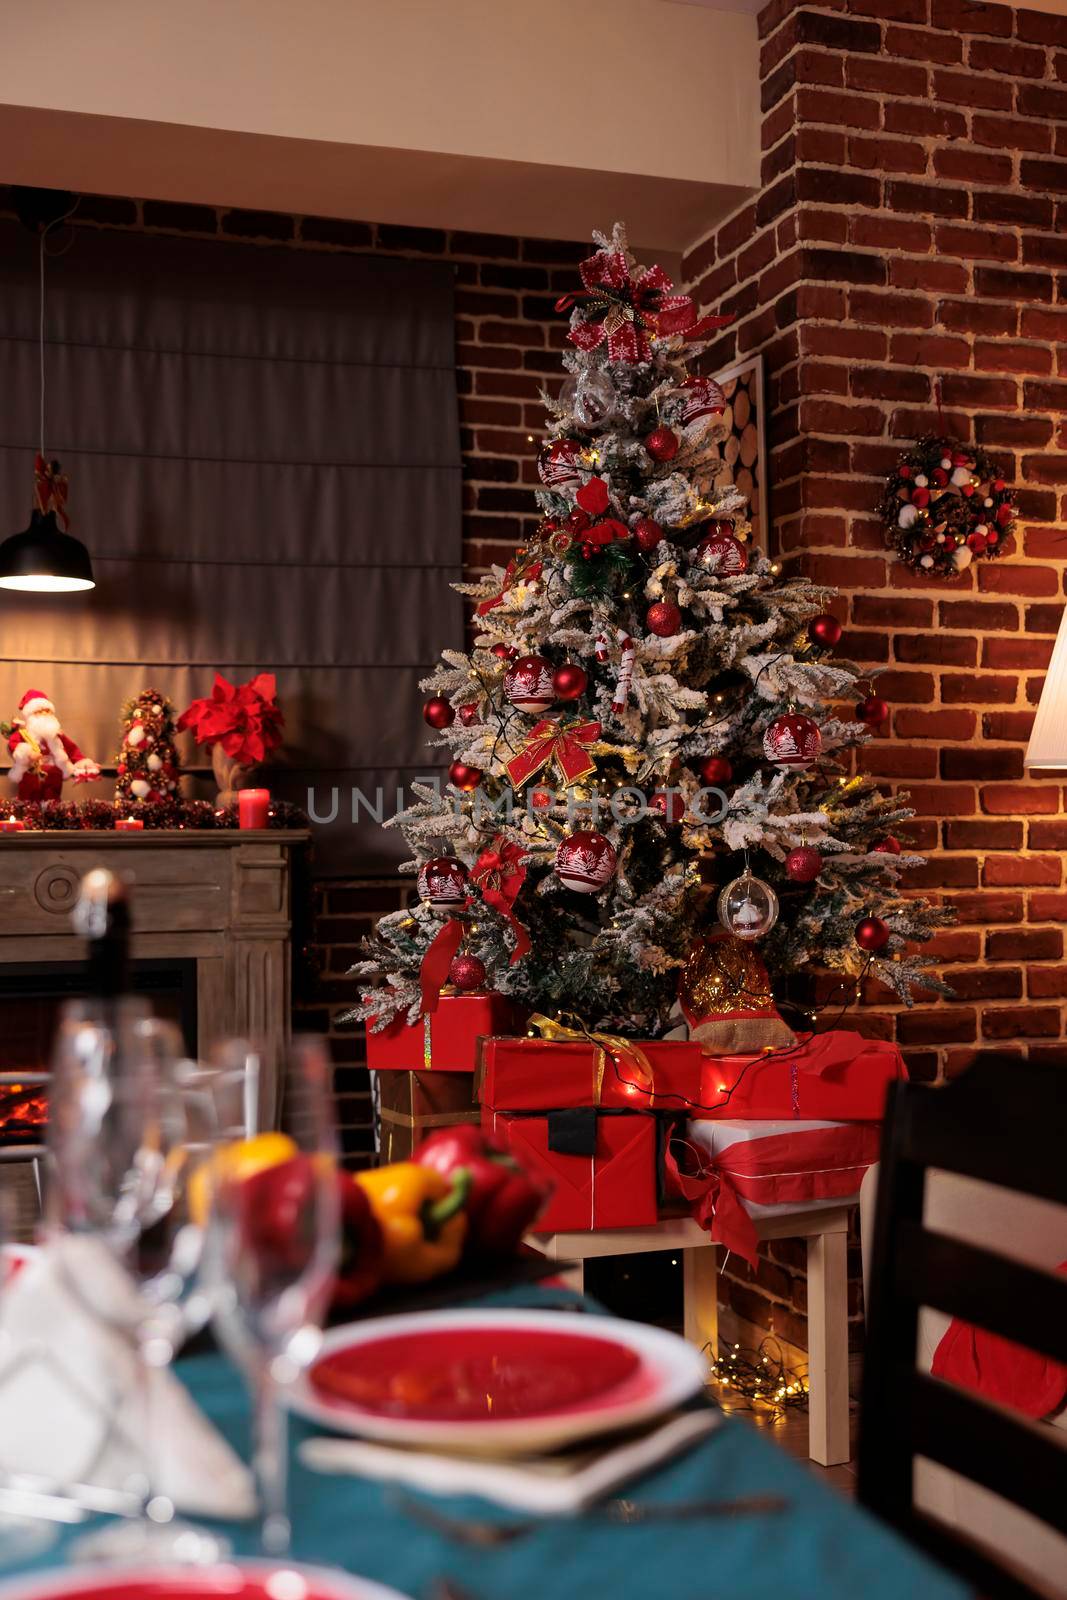 Decorated christmas tree, festive served table in luxury interior, winter seasonal holidays traditional preparations. Xmas presents under fir, garlands decor, warm candlelight in evening